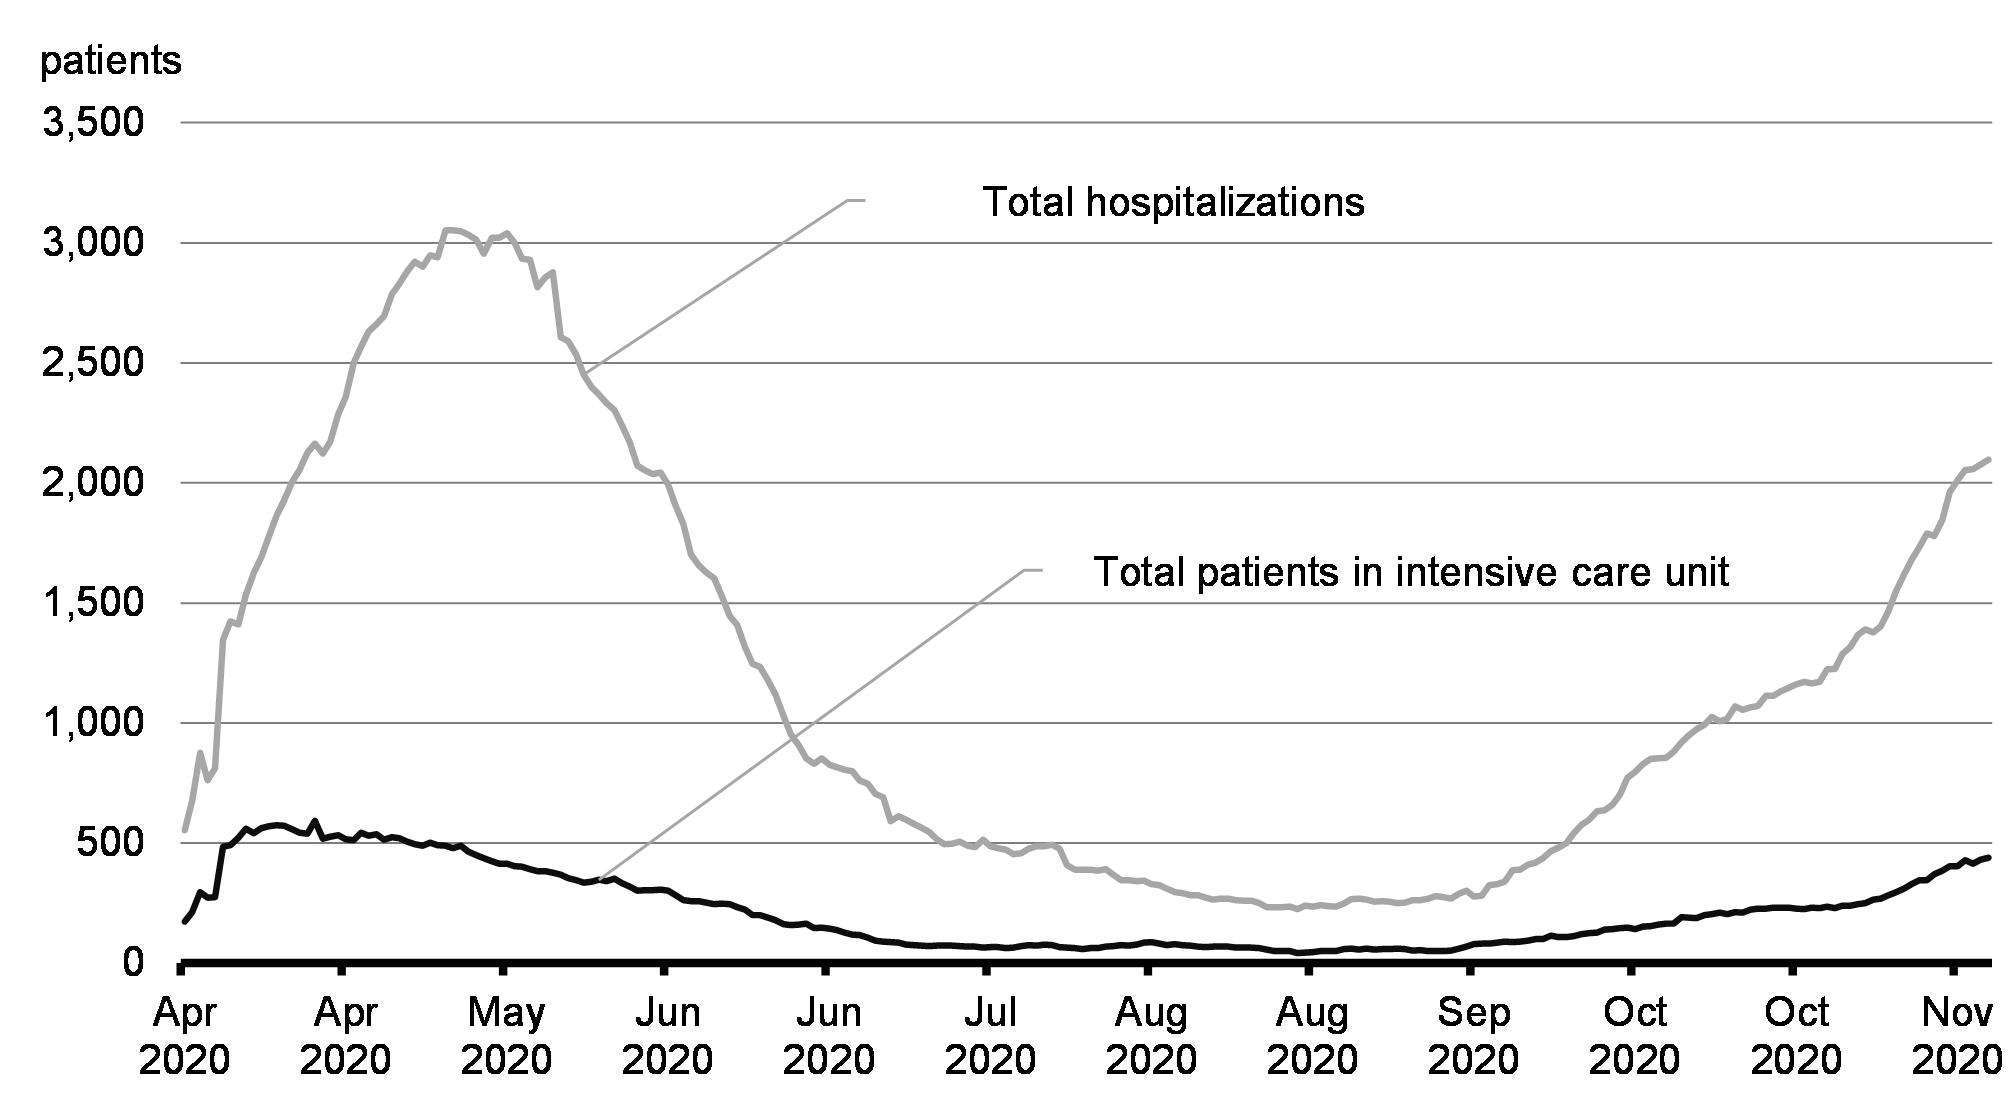 Chart 1.2: Patients in Hospital with COVID-19